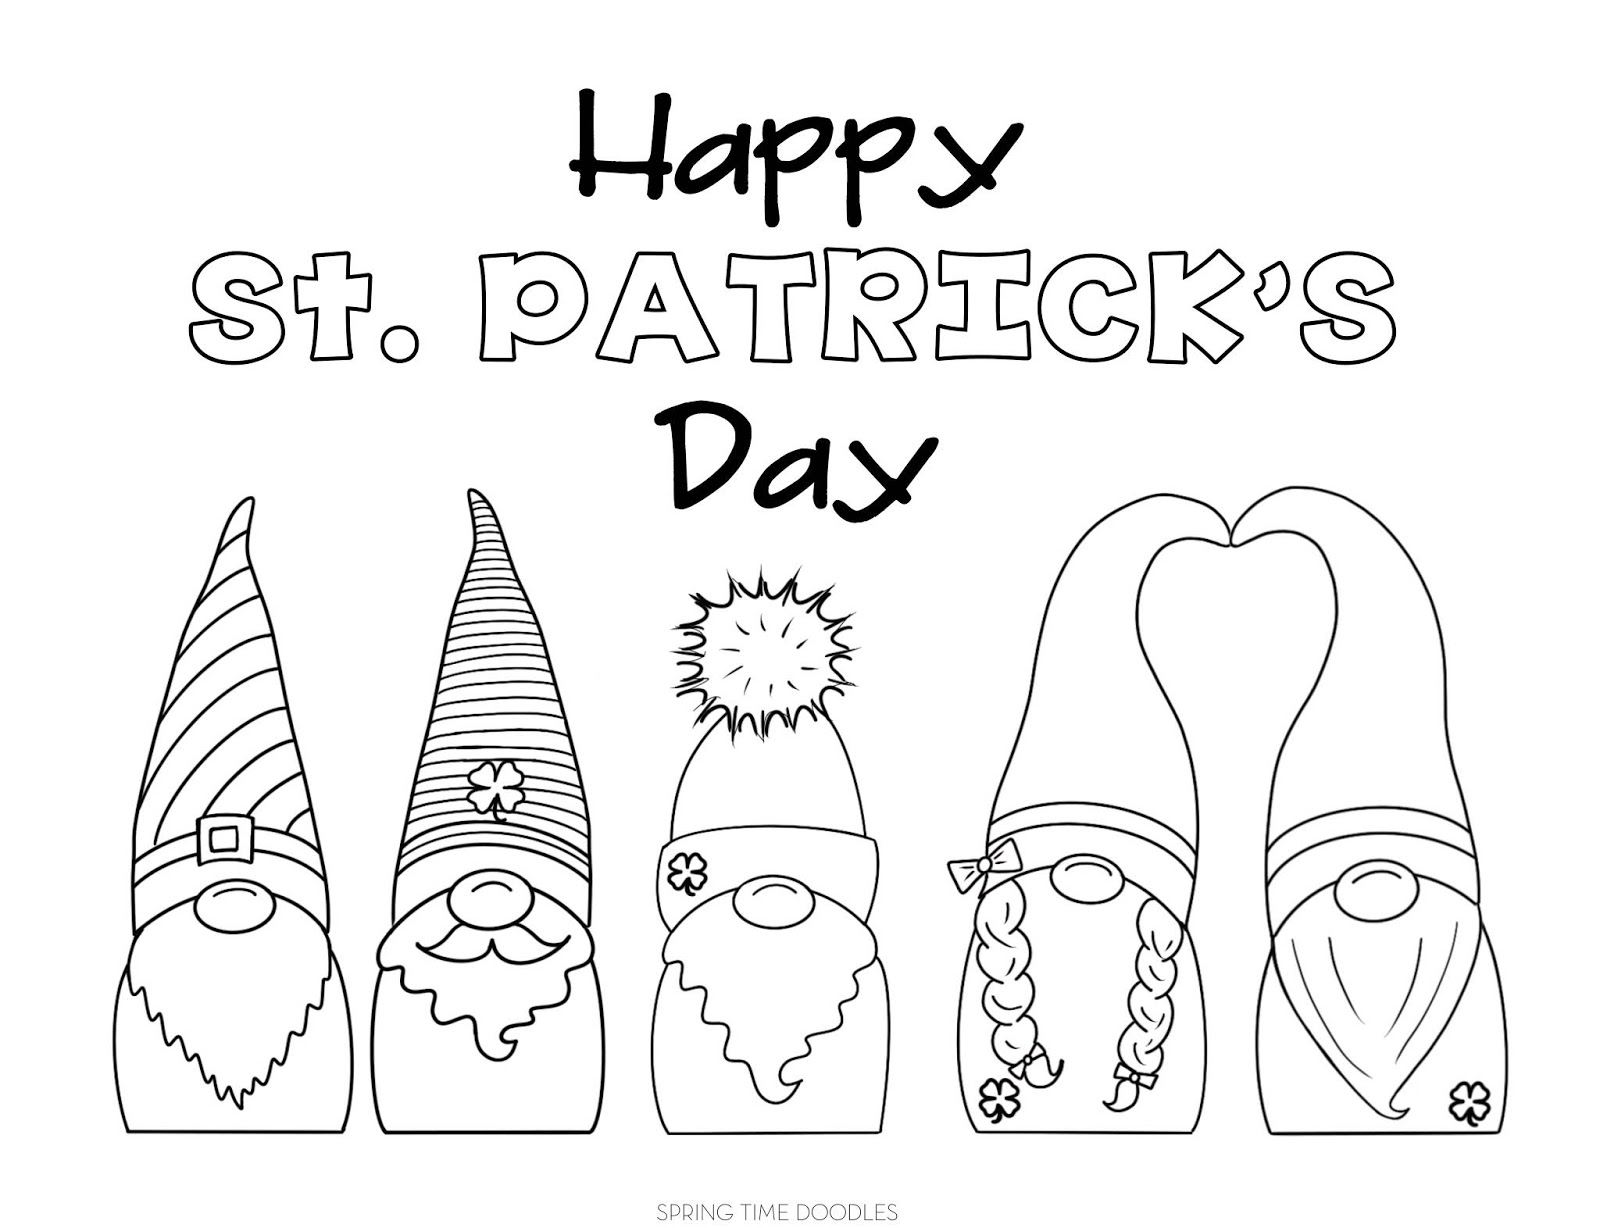 St. Patrick's Day 20 FREE coloring pages